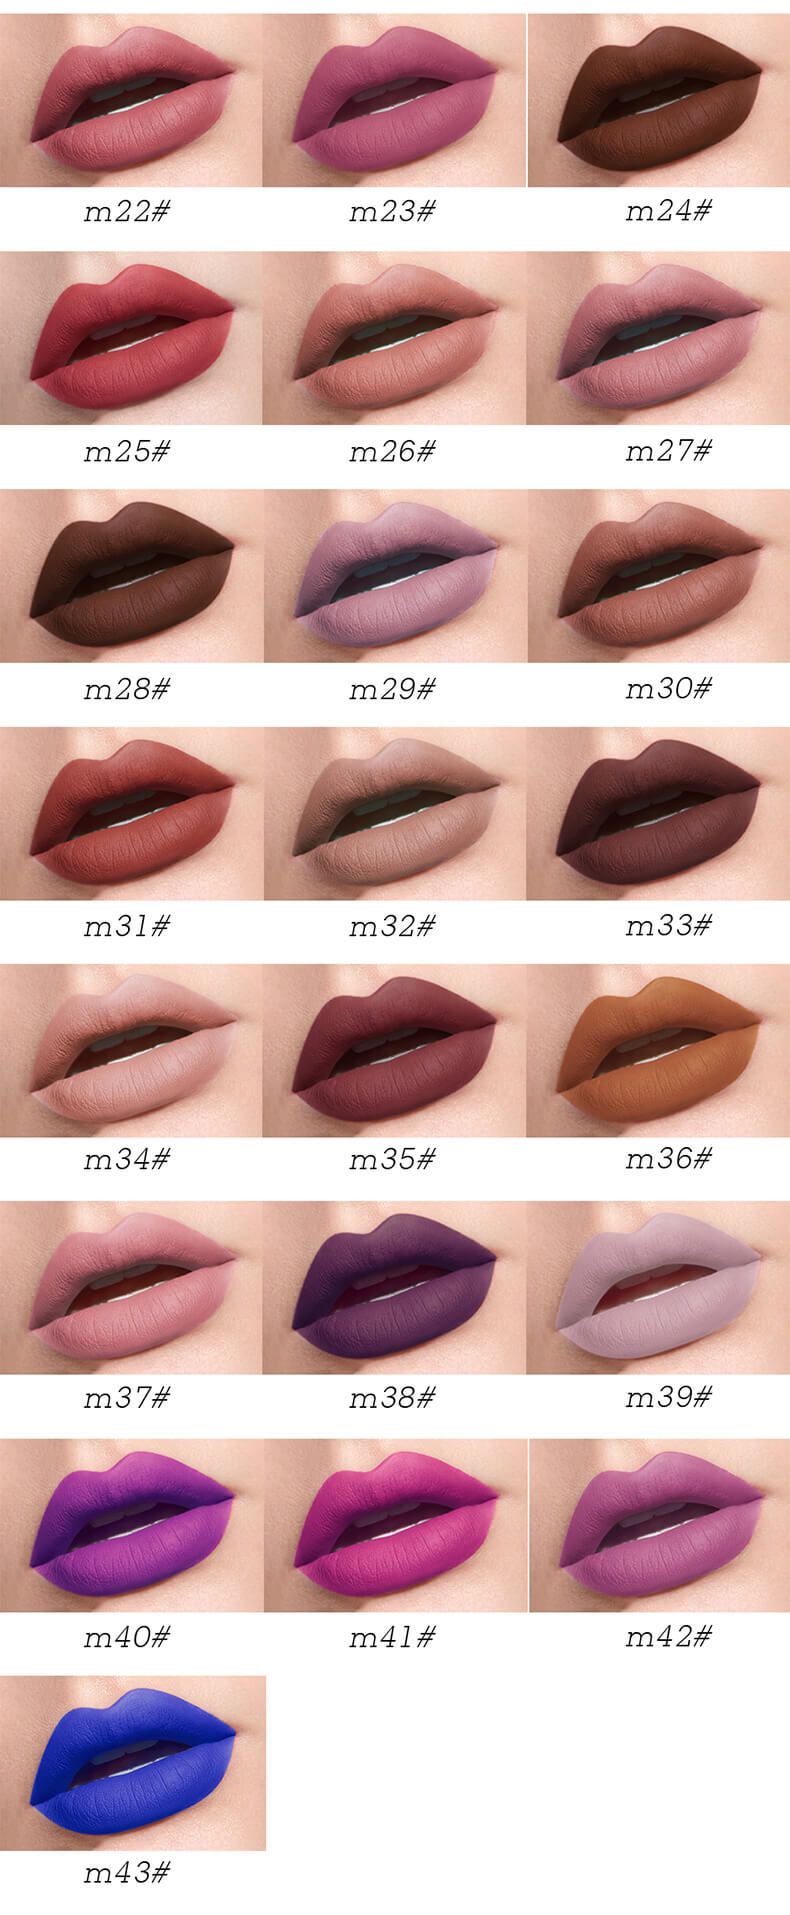 MATTE Private Label Waterproof Liquid Lipstick with 45 Colors - LG0416